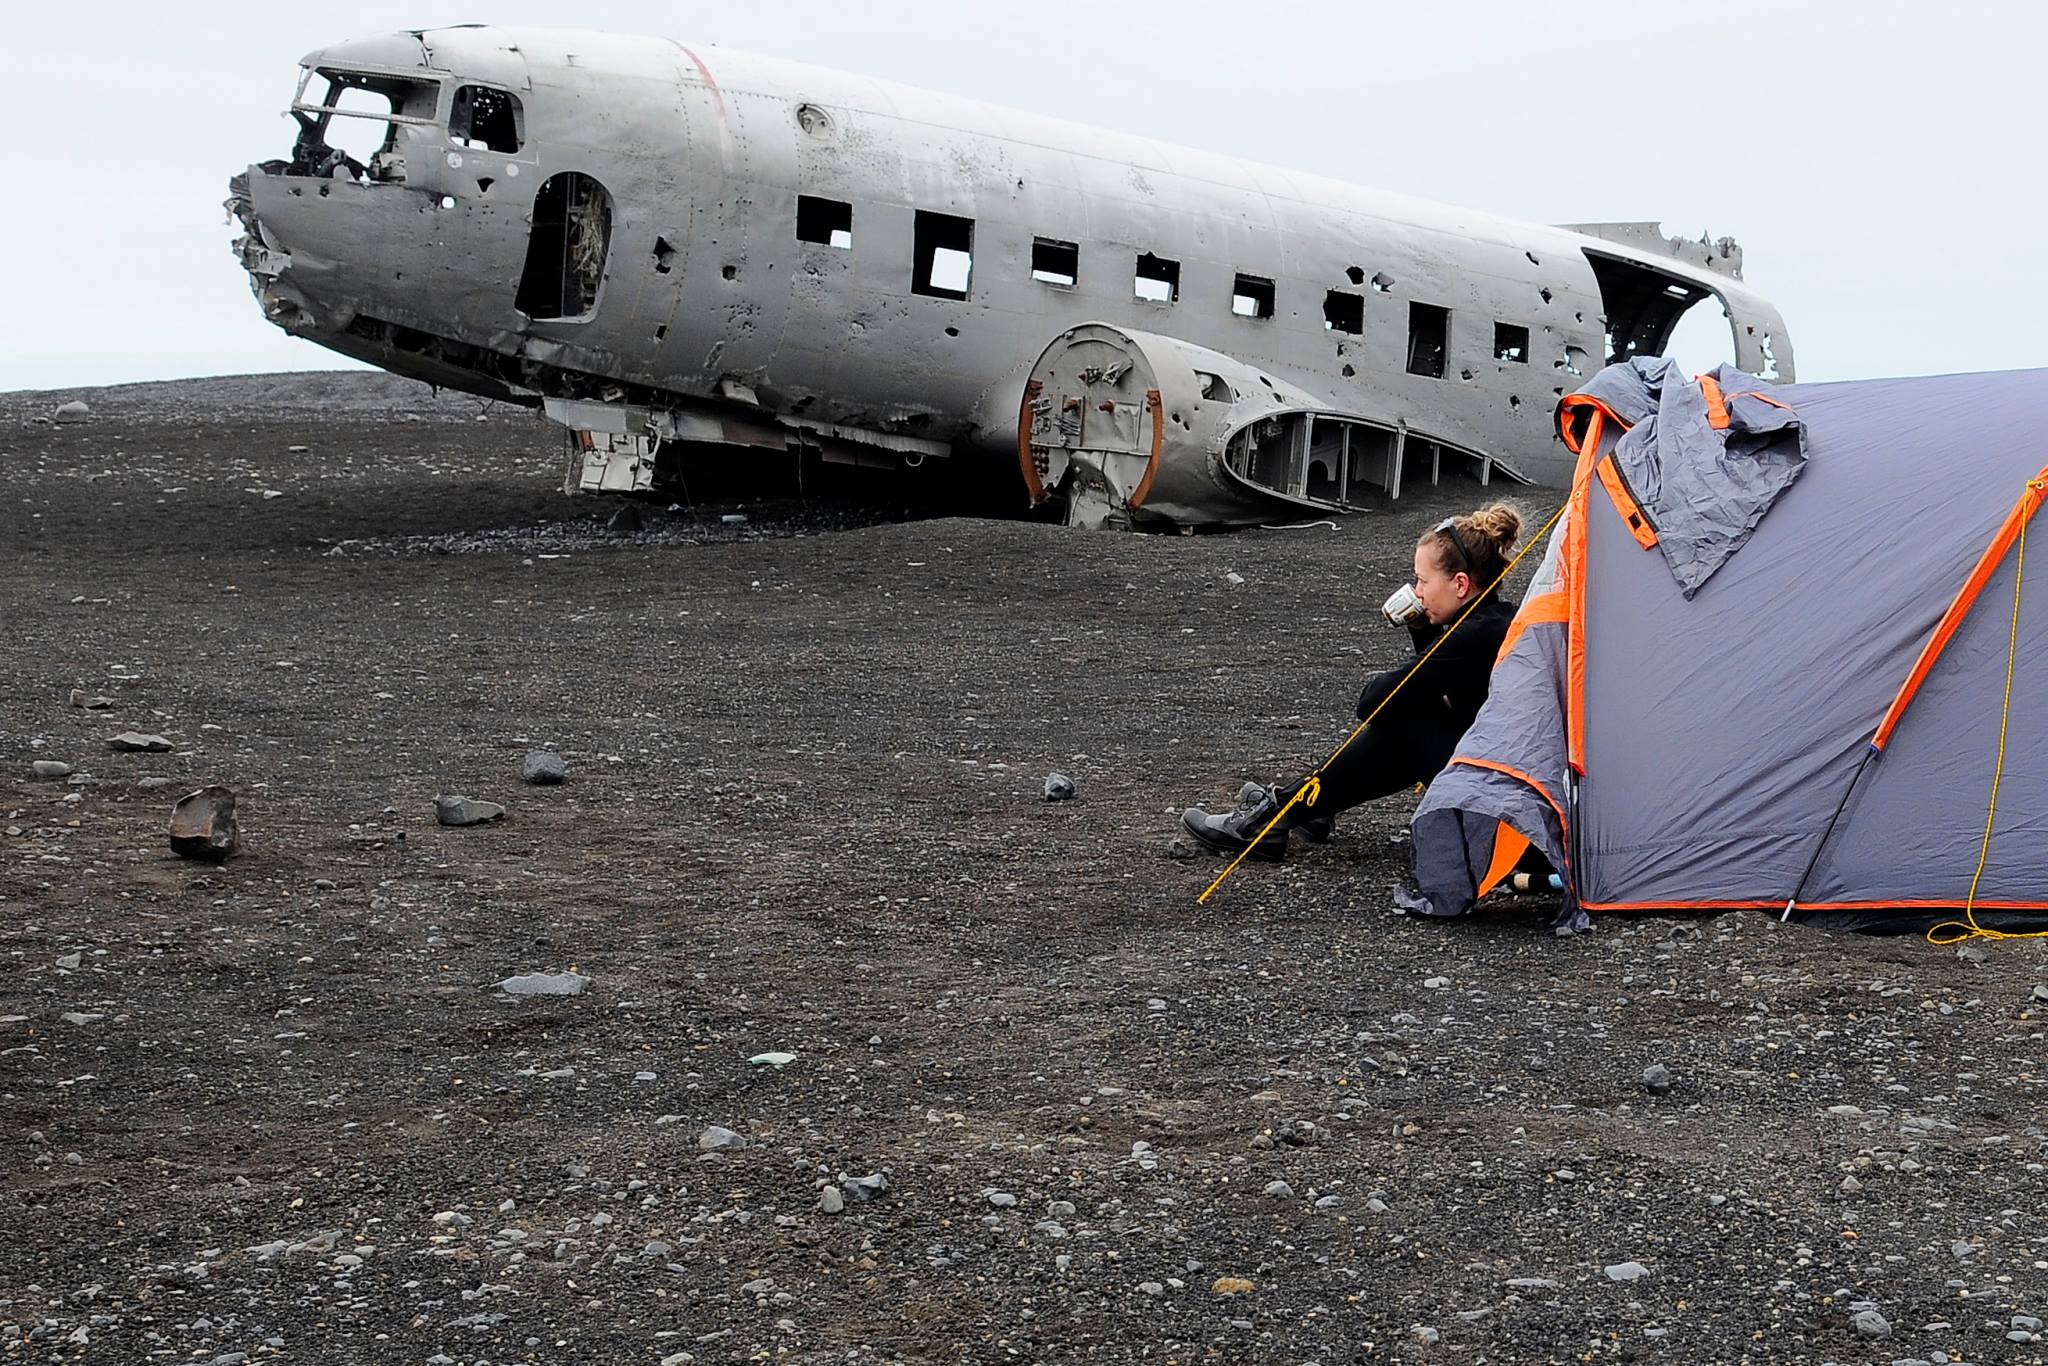 The crashed plane in Iceland. Lying on a black sand beach